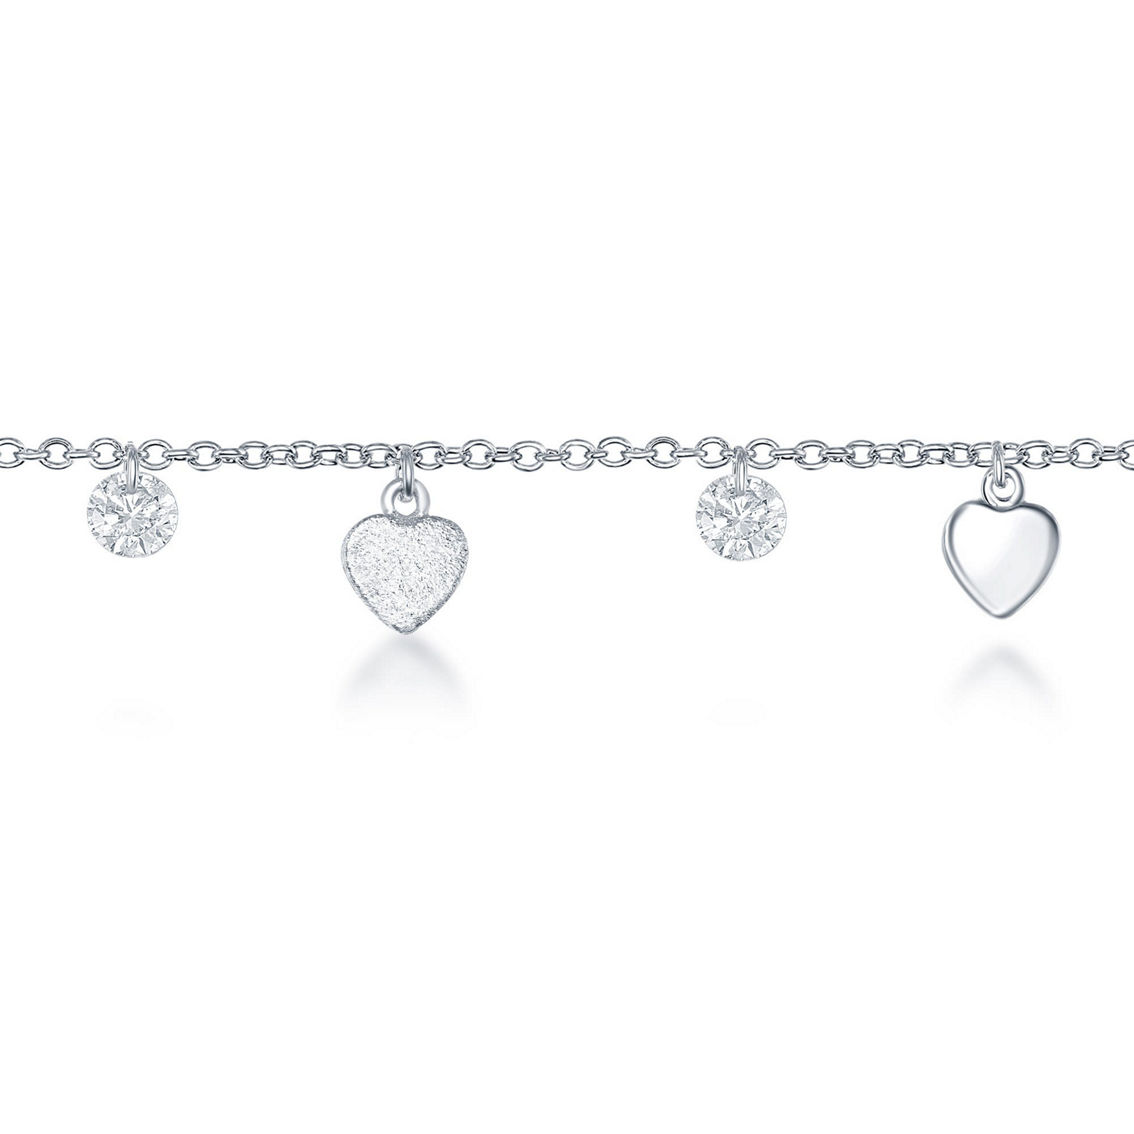 Bella Silver Sterling Silver Alternating CZ with Shiny & Matte Hearts Anklet - Image 2 of 3